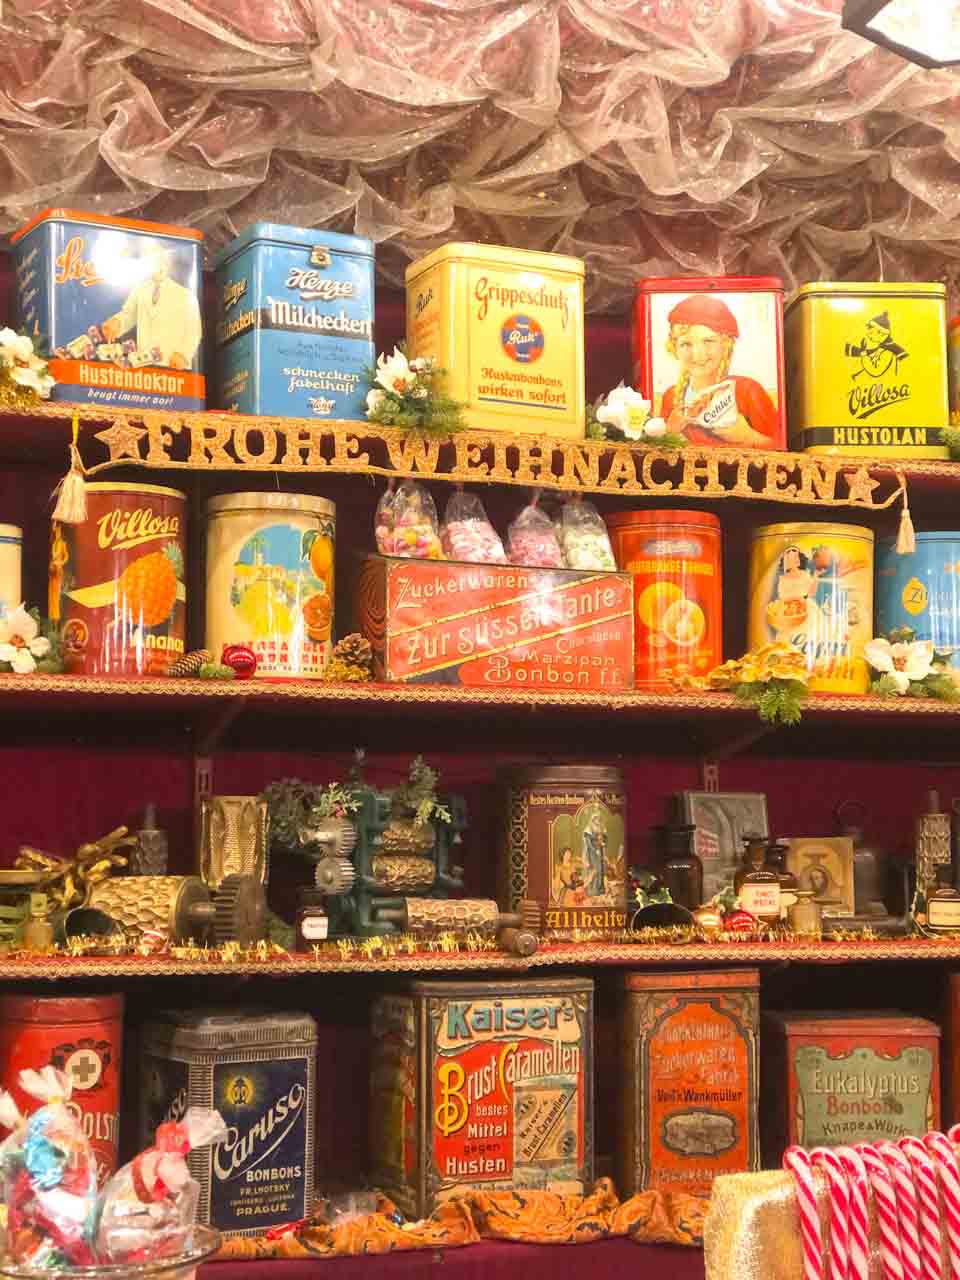 A vintage-themed stall displaying classic German cough and cold remedies in colourful retro packaging, with a sign wishing 'Frohe Weihnachten' (Merry Christmas) above, at the Nuremberg Christmas Market